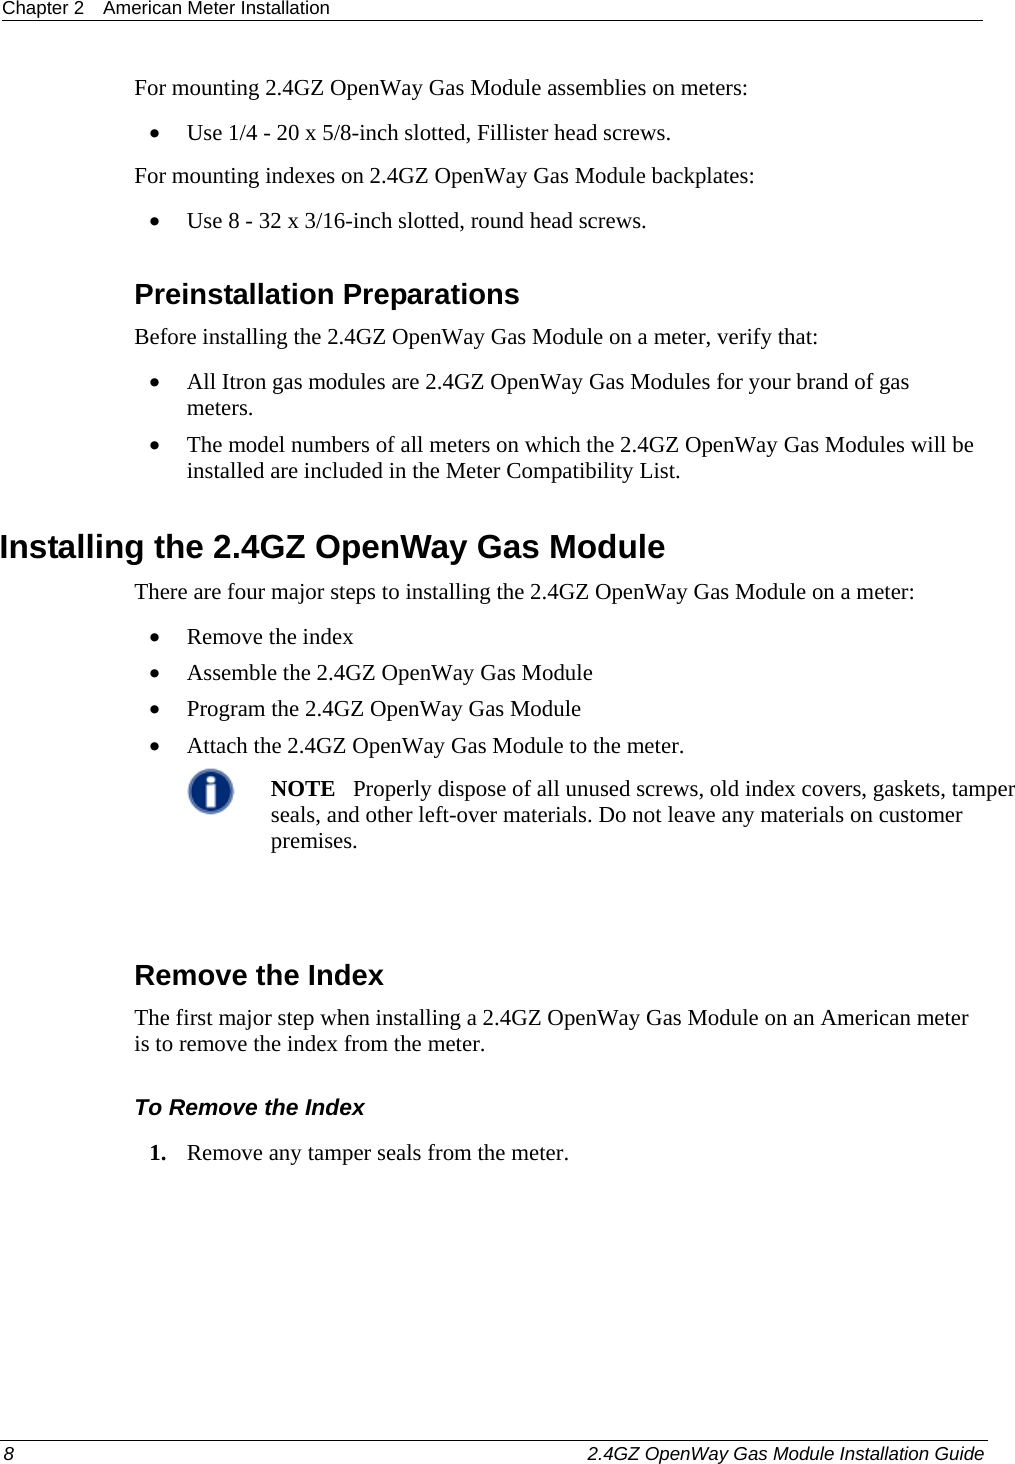 Chapter 2  American Meter Installation  8    2.4GZ OpenWay Gas Module Installation Guide  For mounting 2.4GZ OpenWay Gas Module assemblies on meters: • Use 1/4 - 20 x 5/8-inch slotted, Fillister head screws. For mounting indexes on 2.4GZ OpenWay Gas Module backplates: • Use 8 - 32 x 3/16-inch slotted, round head screws.  Preinstallation Preparations Before installing the 2.4GZ OpenWay Gas Module on a meter, verify that:   • All Itron gas modules are 2.4GZ OpenWay Gas Modules for your brand of gas meters.  • The model numbers of all meters on which the 2.4GZ OpenWay Gas Modules will be installed are included in the Meter Compatibility List.  Installing the 2.4GZ OpenWay Gas Module There are four major steps to installing the 2.4GZ OpenWay Gas Module on a meter: • Remove the index • Assemble the 2.4GZ OpenWay Gas Module • Program the 2.4GZ OpenWay Gas Module • Attach the 2.4GZ OpenWay Gas Module to the meter.  NOTE   Properly dispose of all unused screws, old index covers, gaskets, tamper seals, and other left-over materials. Do not leave any materials on customer premises.    Remove the Index The first major step when installing a 2.4GZ OpenWay Gas Module on an American meter is to remove the index from the meter. To Remove the Index 1. Remove any tamper seals from the meter.  